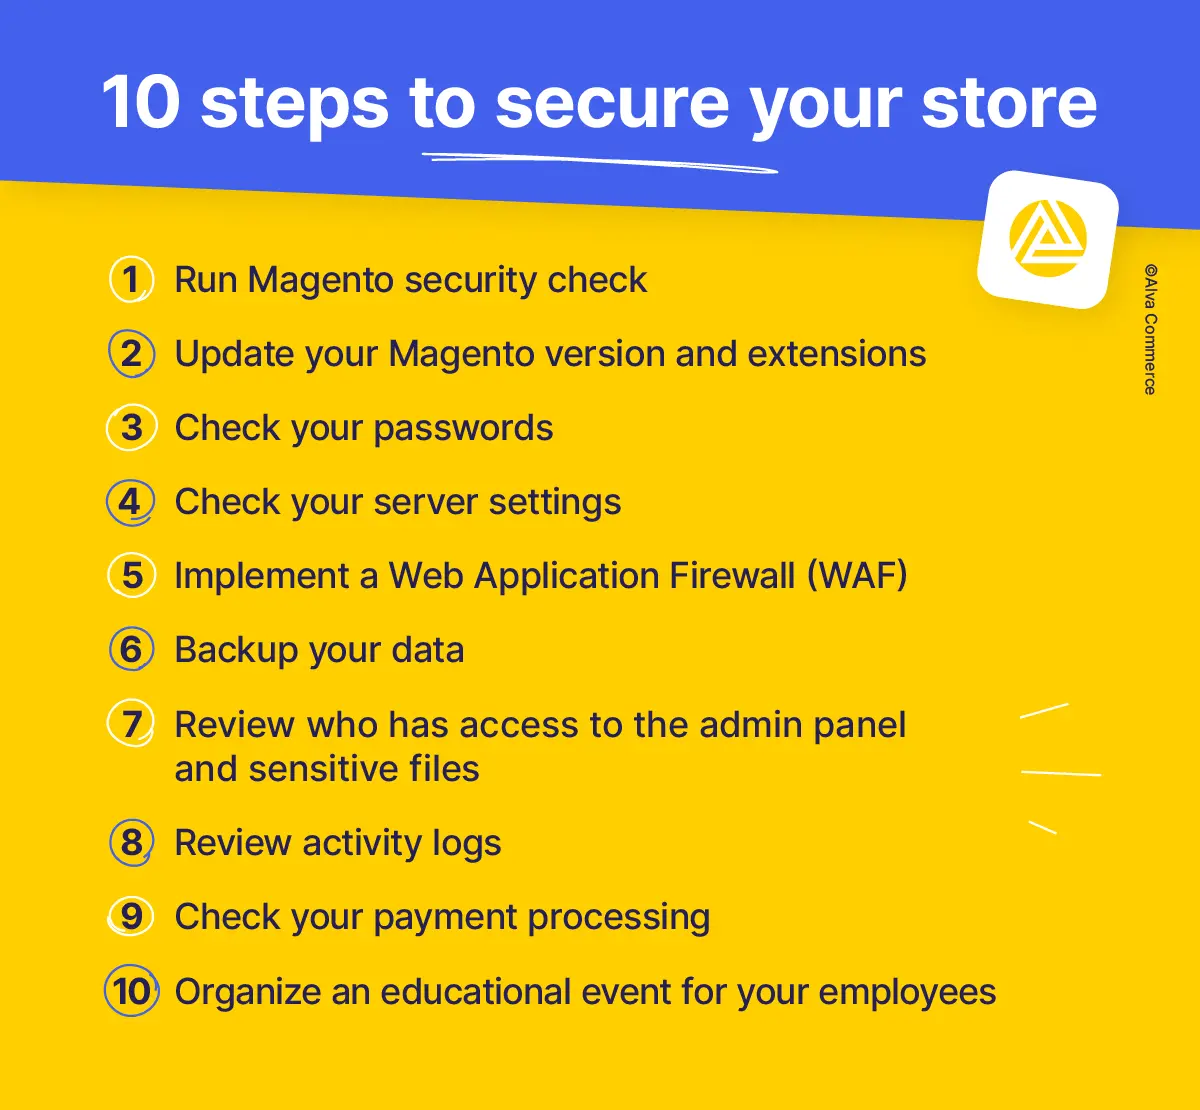 Step-by-step guide to checking your store’s security